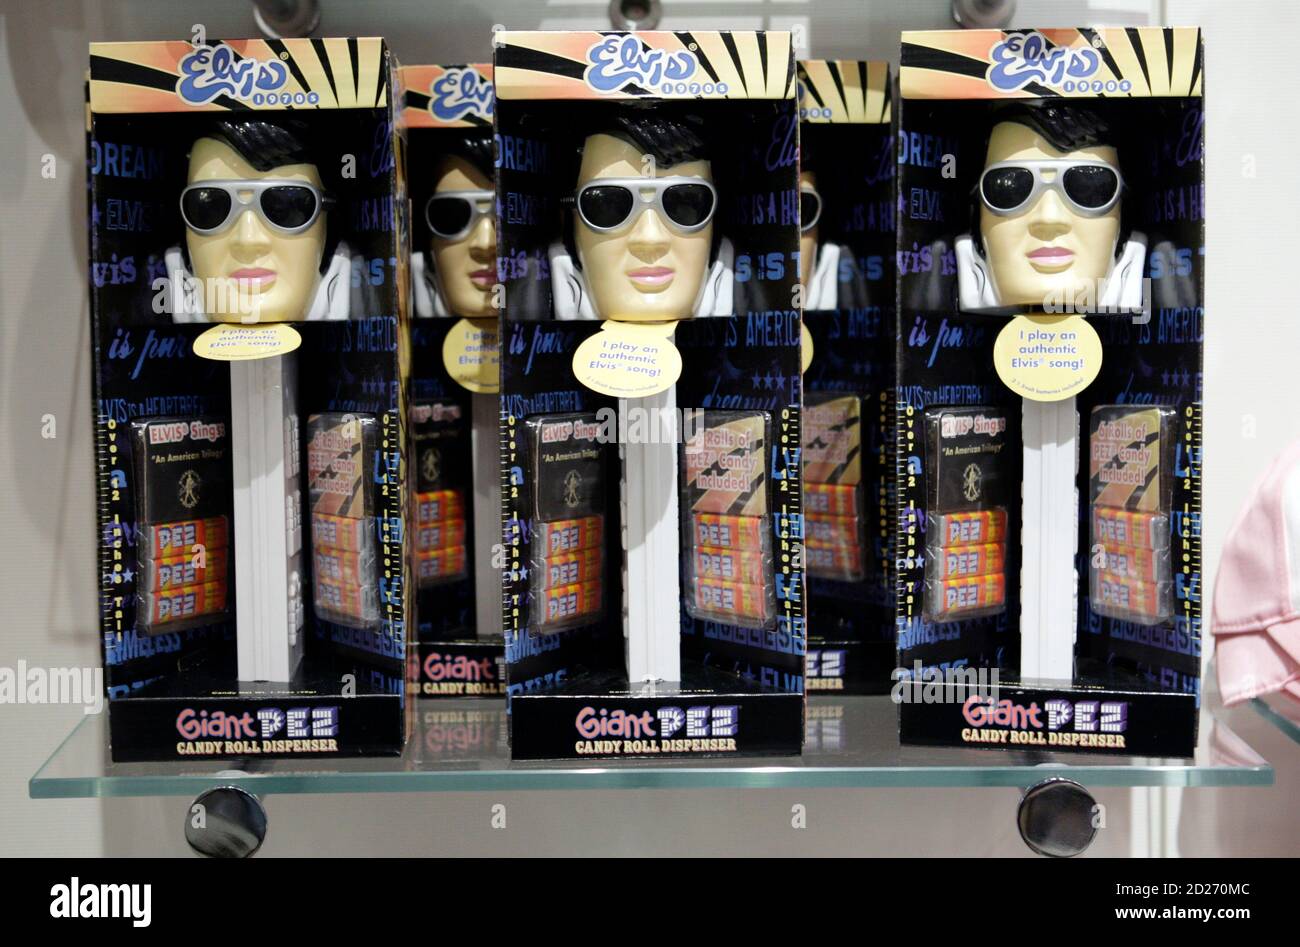 Elvis Presley giant PEZ candy dispensers are displayed at the official Viva ELVIS store at the Aria hotel-casino in Las Vegas, Nevada, December 15, 2009. Preview performances for the new show by Cirque du Soleil will begin Friday, December 18. Aria, the centerpiece of the $8.5 billion project, will open after a fireworks display Wednesday night. The development is a partnership between MGM Mirage and Dubai World. REUTERS/Las Vegas Sun/Steve Marcus (UNITED STATES - Tags: BUSINESS ENTERTAINMENT) Stock Photo